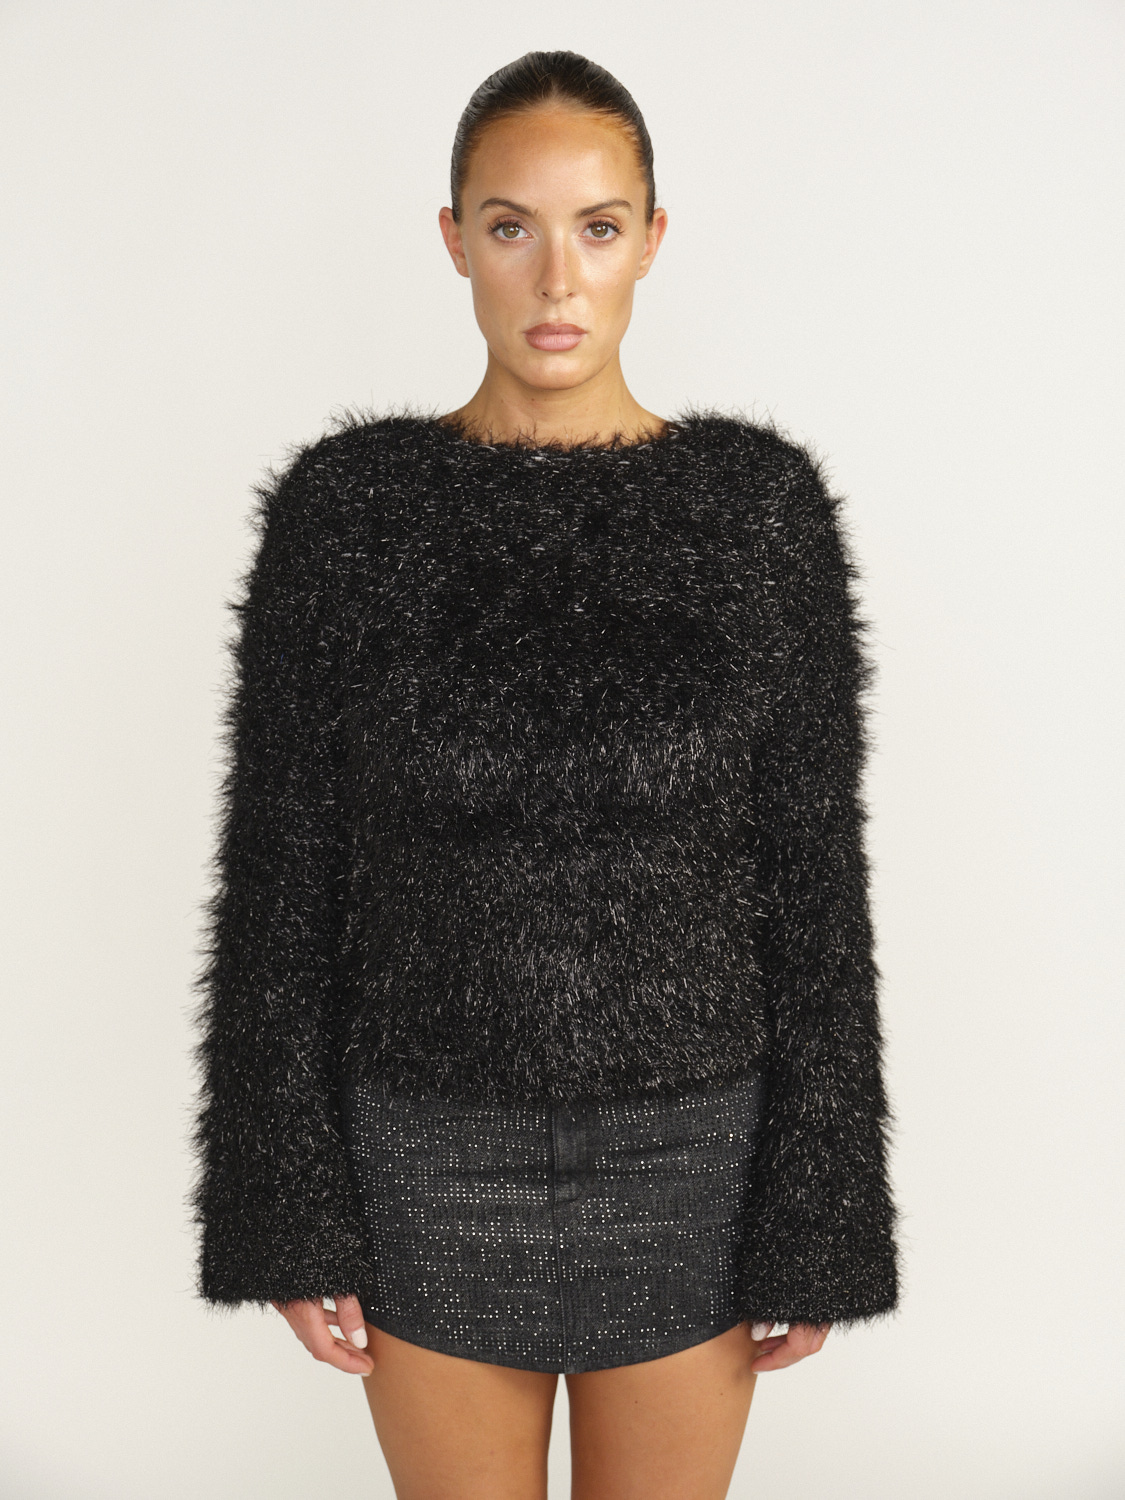 Victoria Beckham Sweater with open back and glitter thread details  black XS